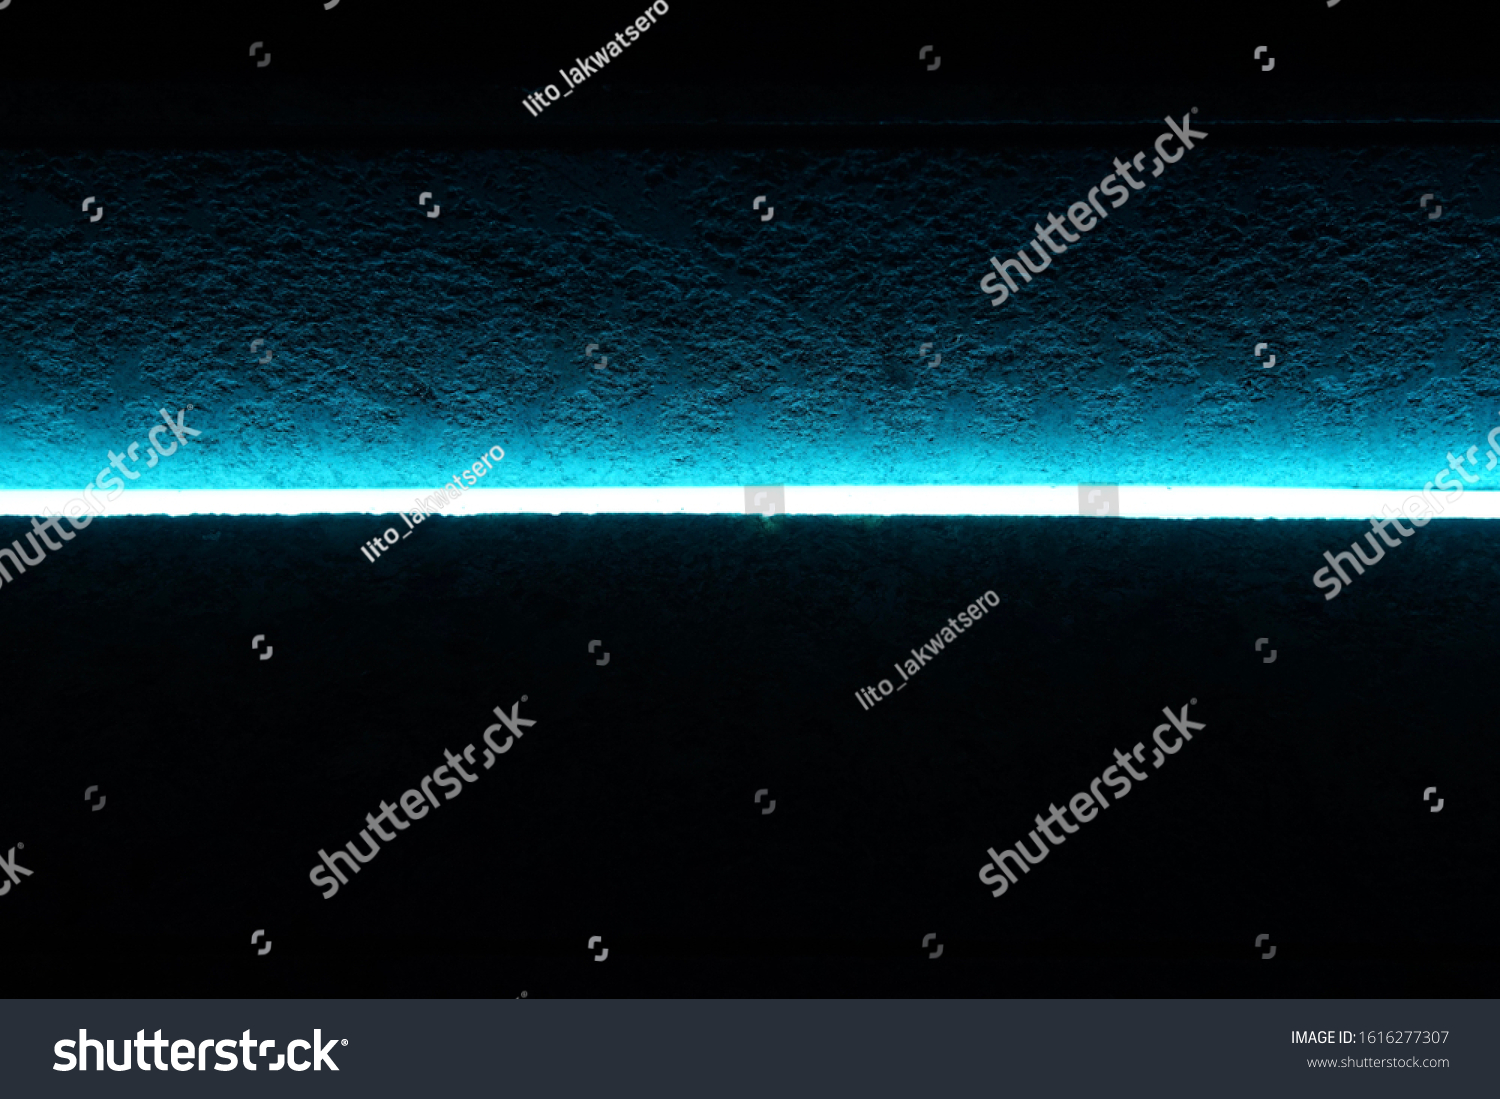 A narrow blue neon light glows in the dark to partly illuminate a rough cement surface #1616277307